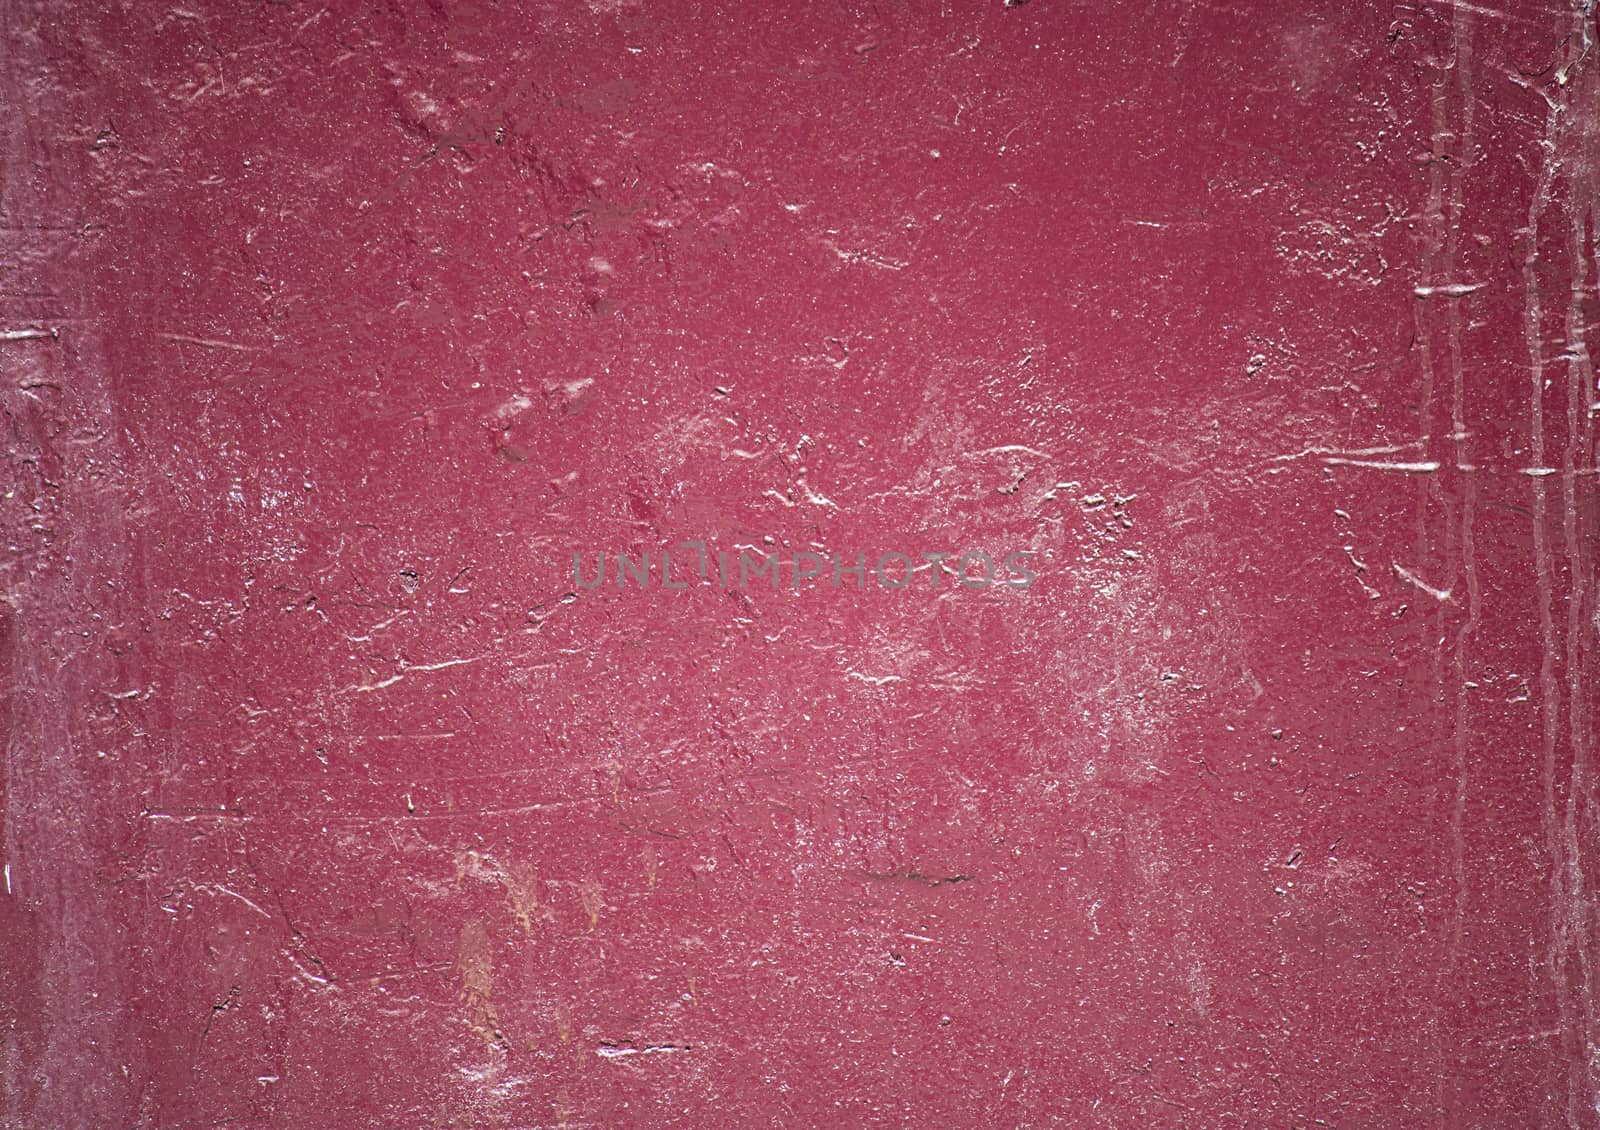 Old Grunge Red color Wall Texture Background by shaadjutt36